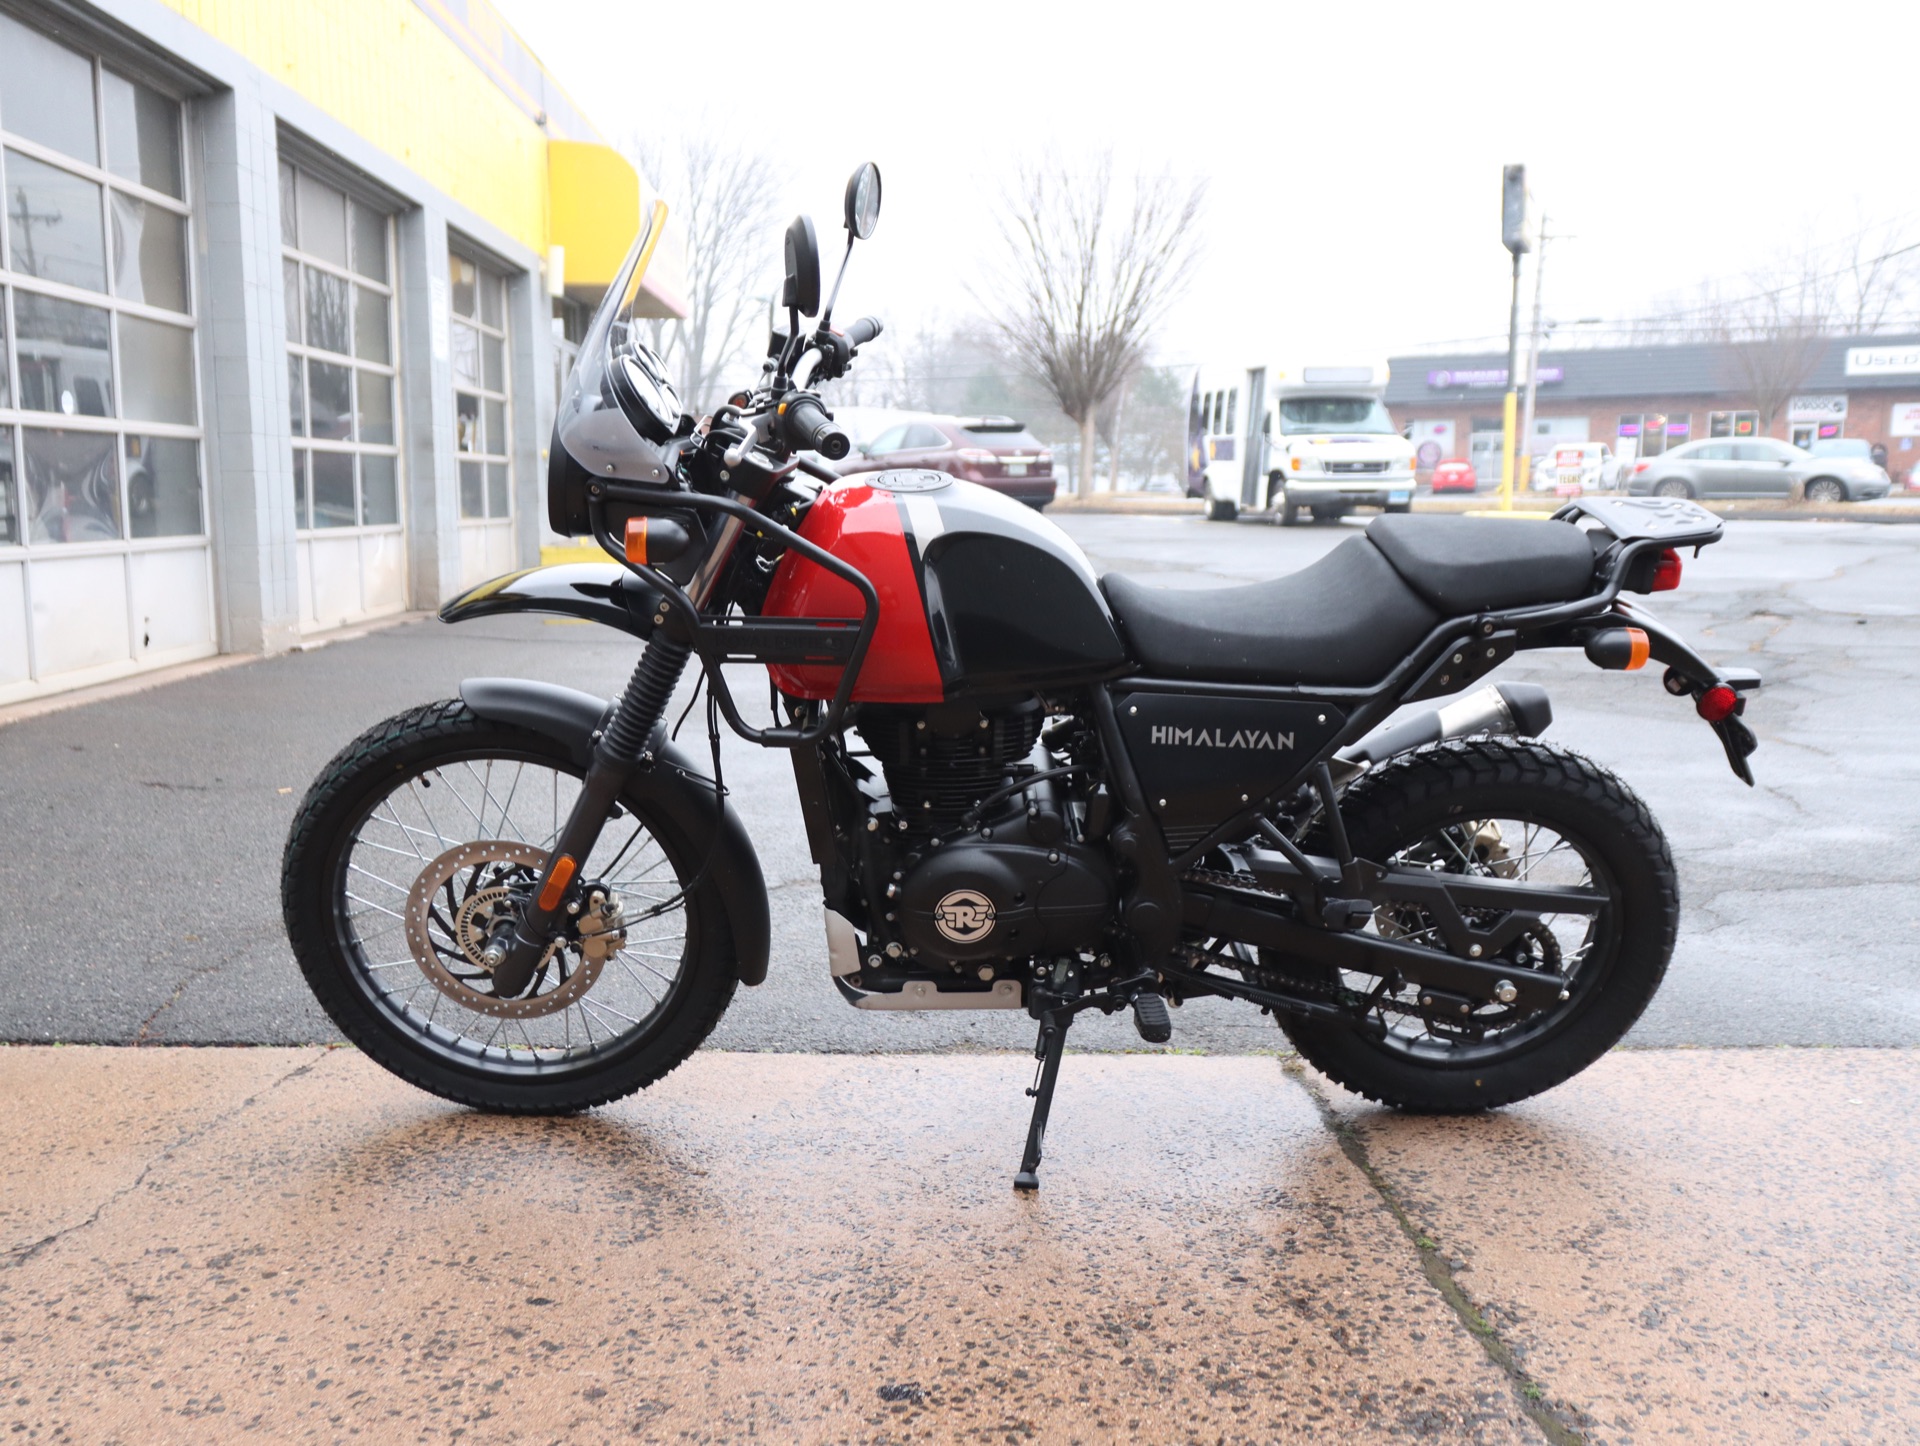 2022 Royal Enfield Himalayan in Enfield, Connecticut - Photo 6